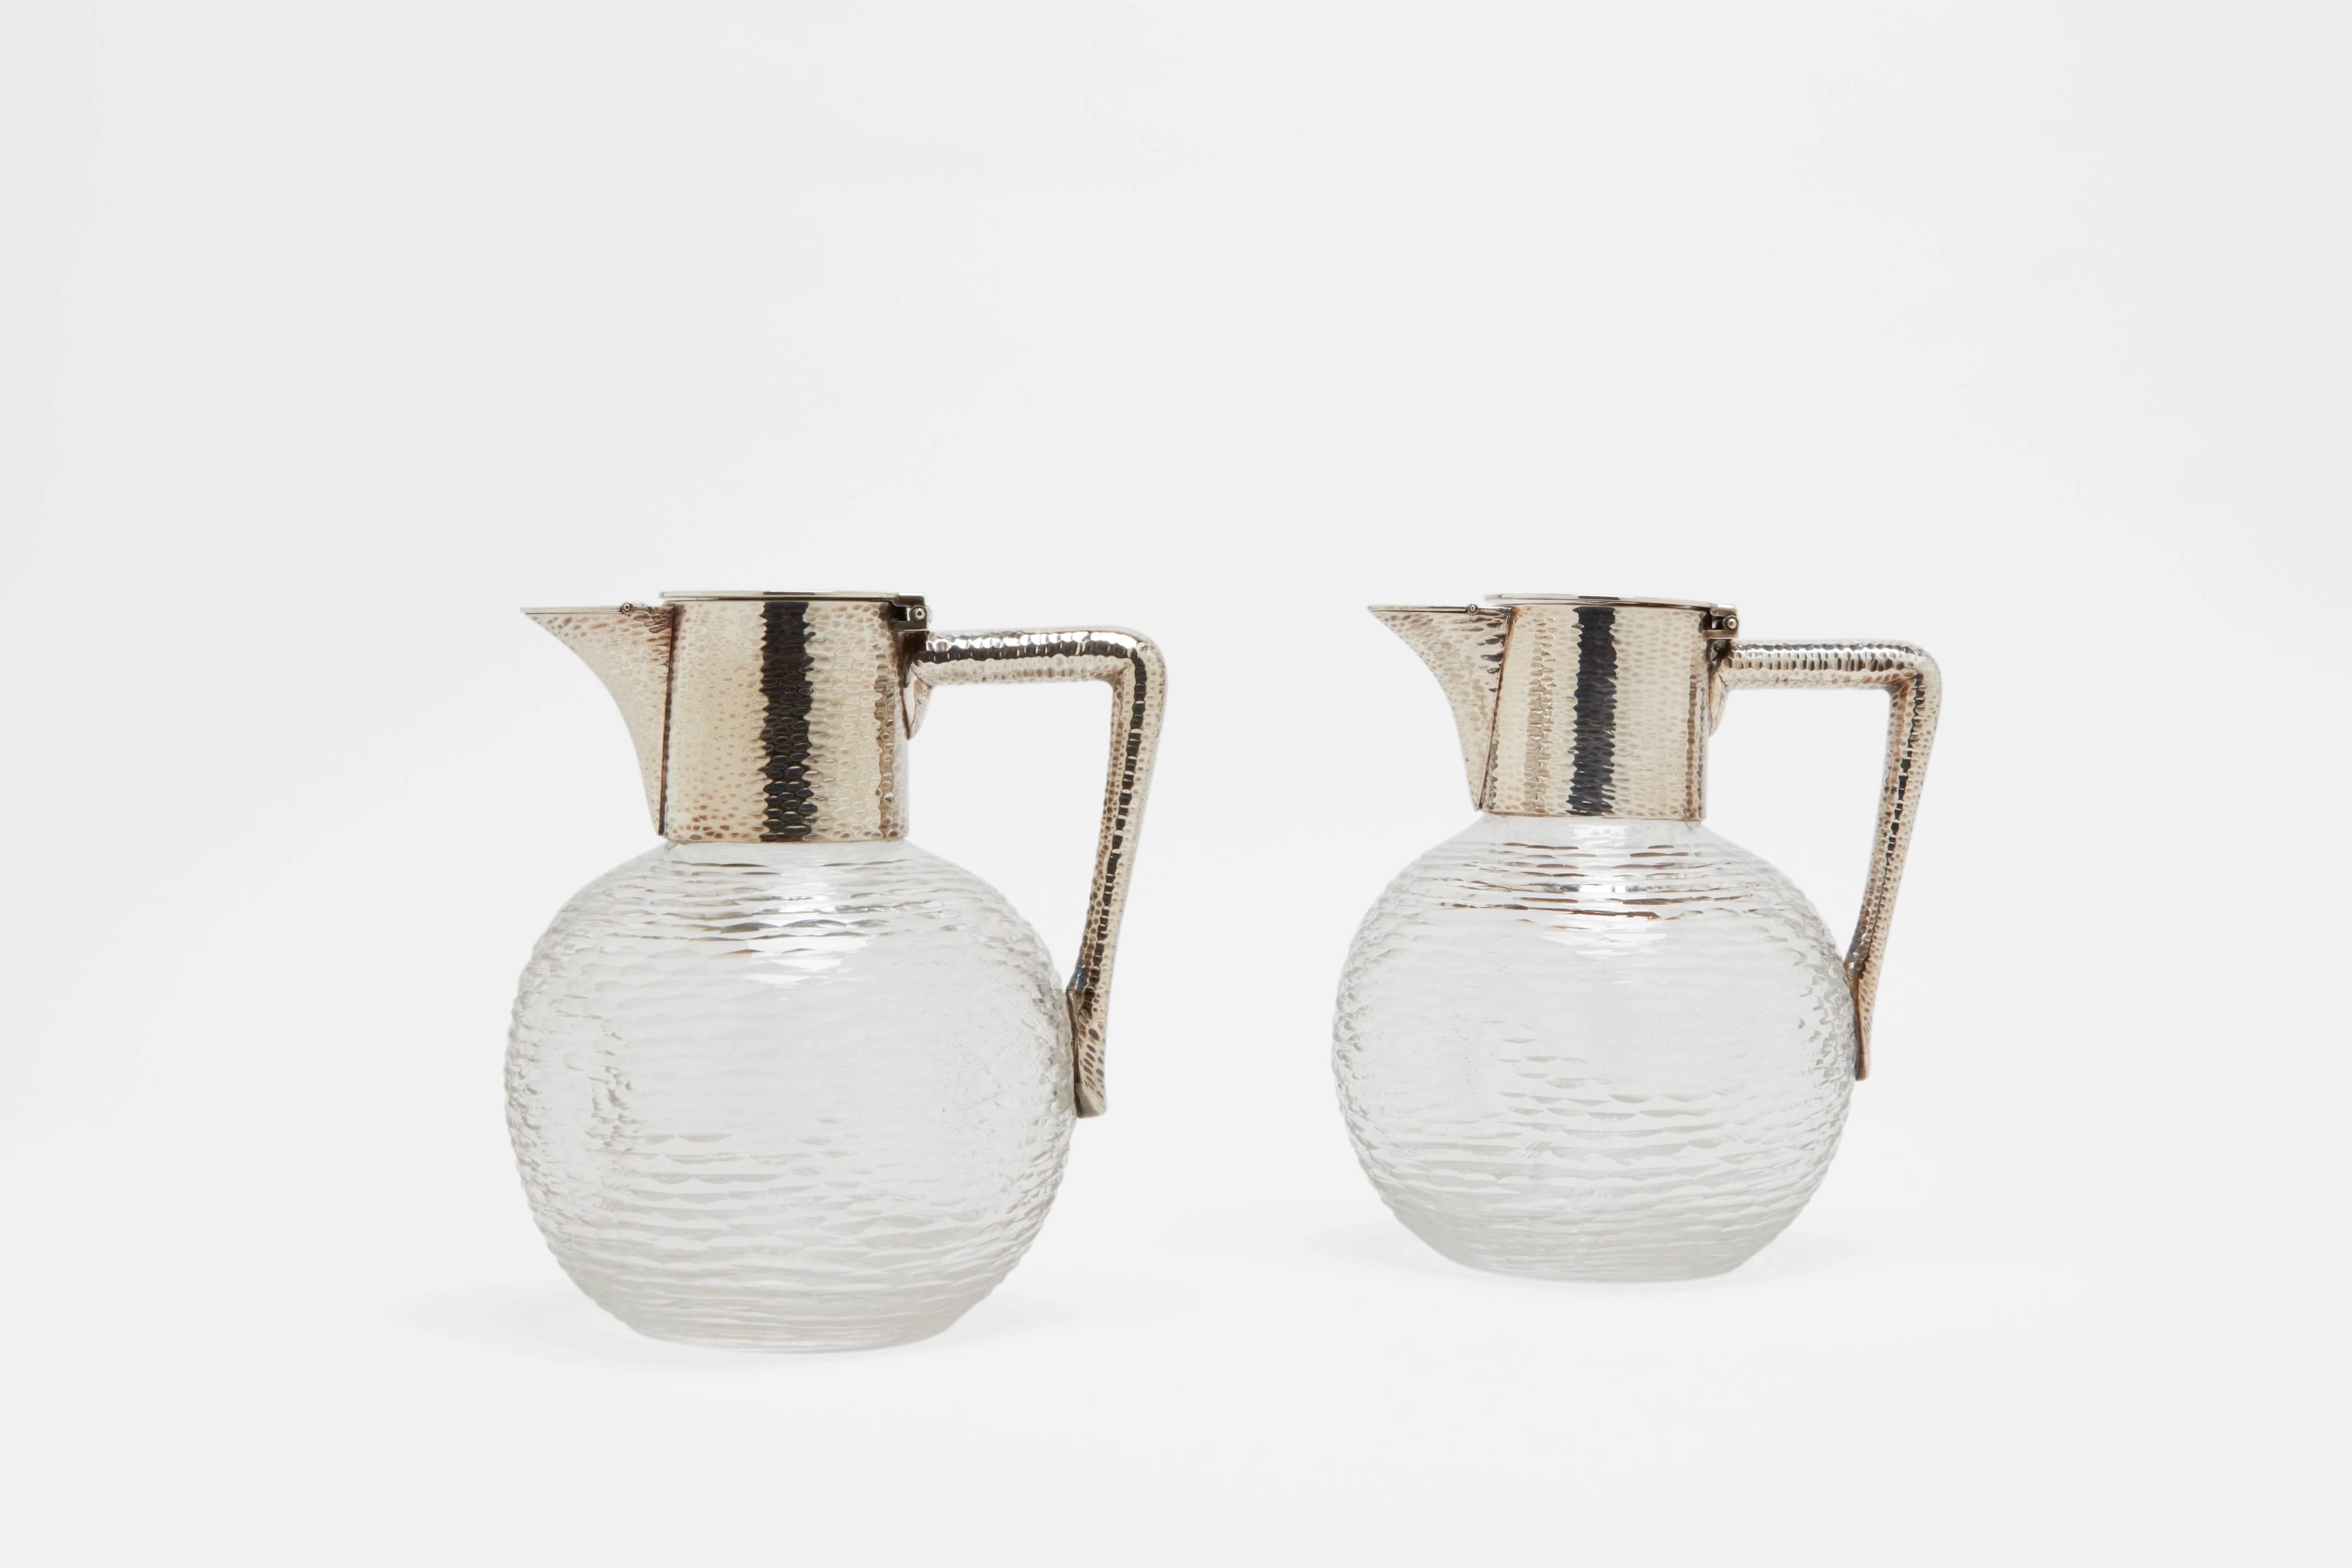 A pair of silver plate table water or wine pitchers in straw grain cut-glass and straw grain silver plate. These beautifully made and perfectly proportioned pitchers are made by one of England's great silversmithing companies, Hukin and Heath.
The